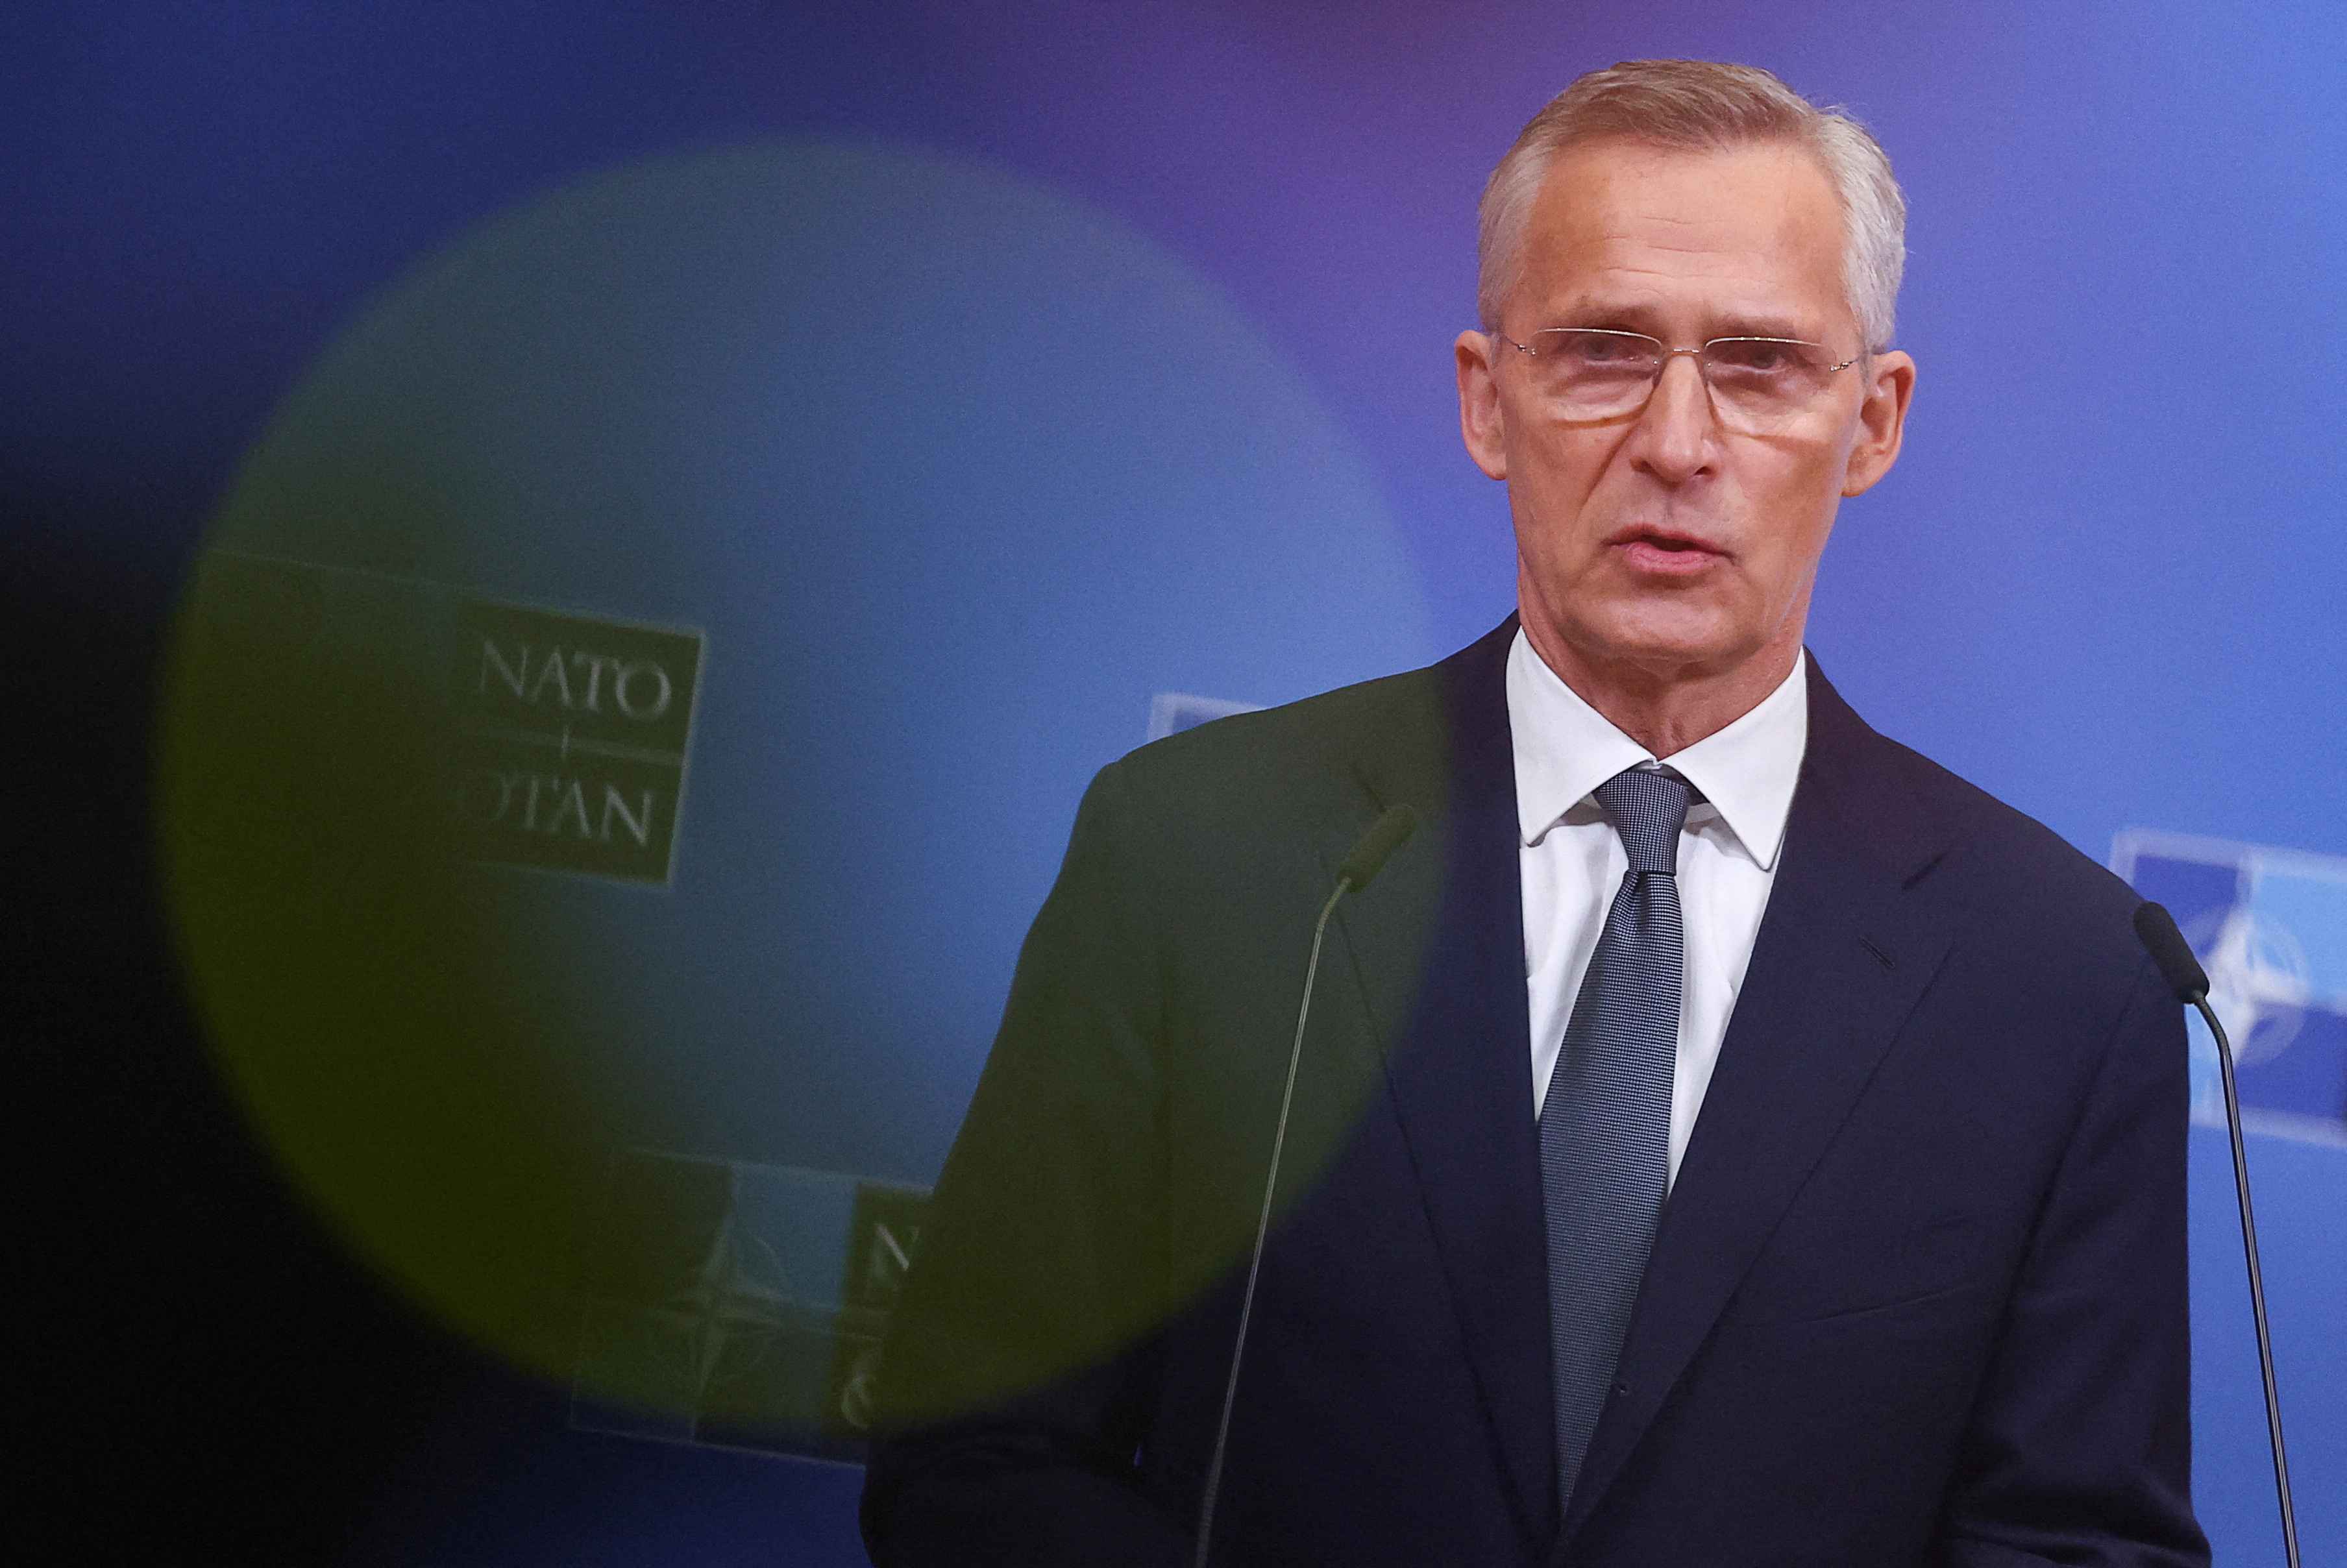 NATO Secretary General Stoltenberg gives press conference to present NATO's annual report in Brussels